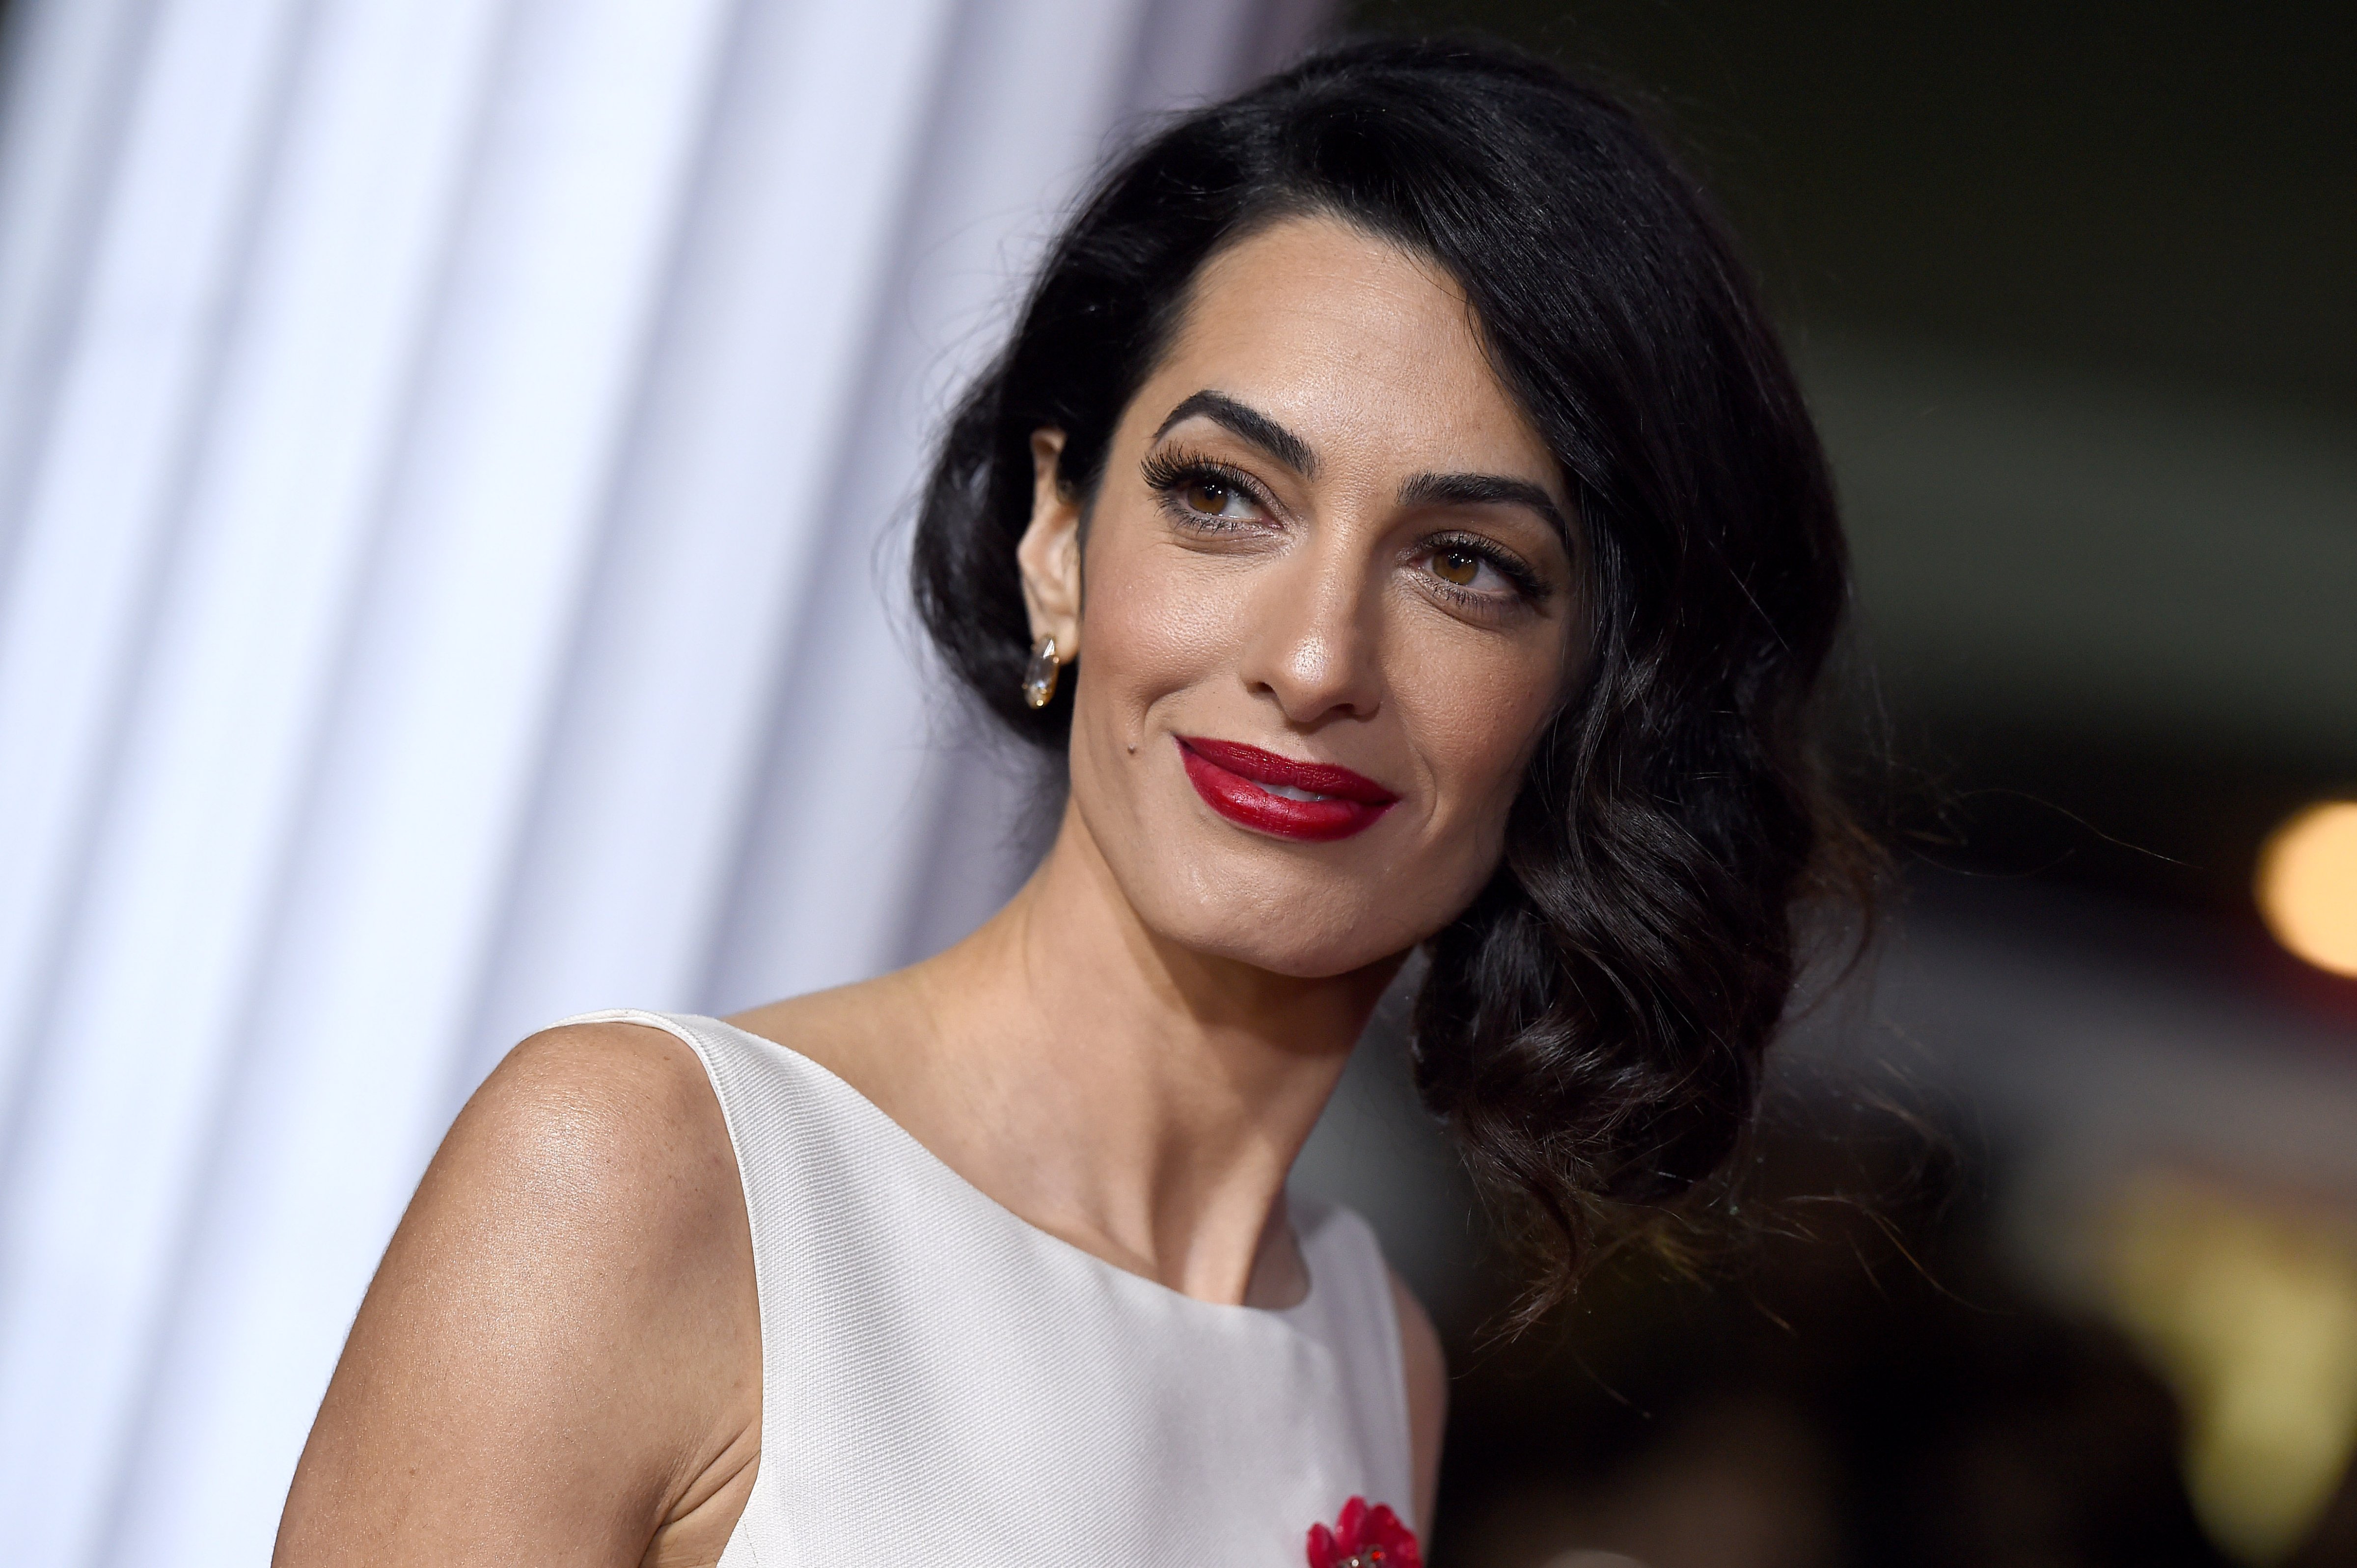 Amal Clooney in Wesywood, CA on Feb. 1, 2016. (Axelle/Bauer-Griffin&mdash;Getty Images)